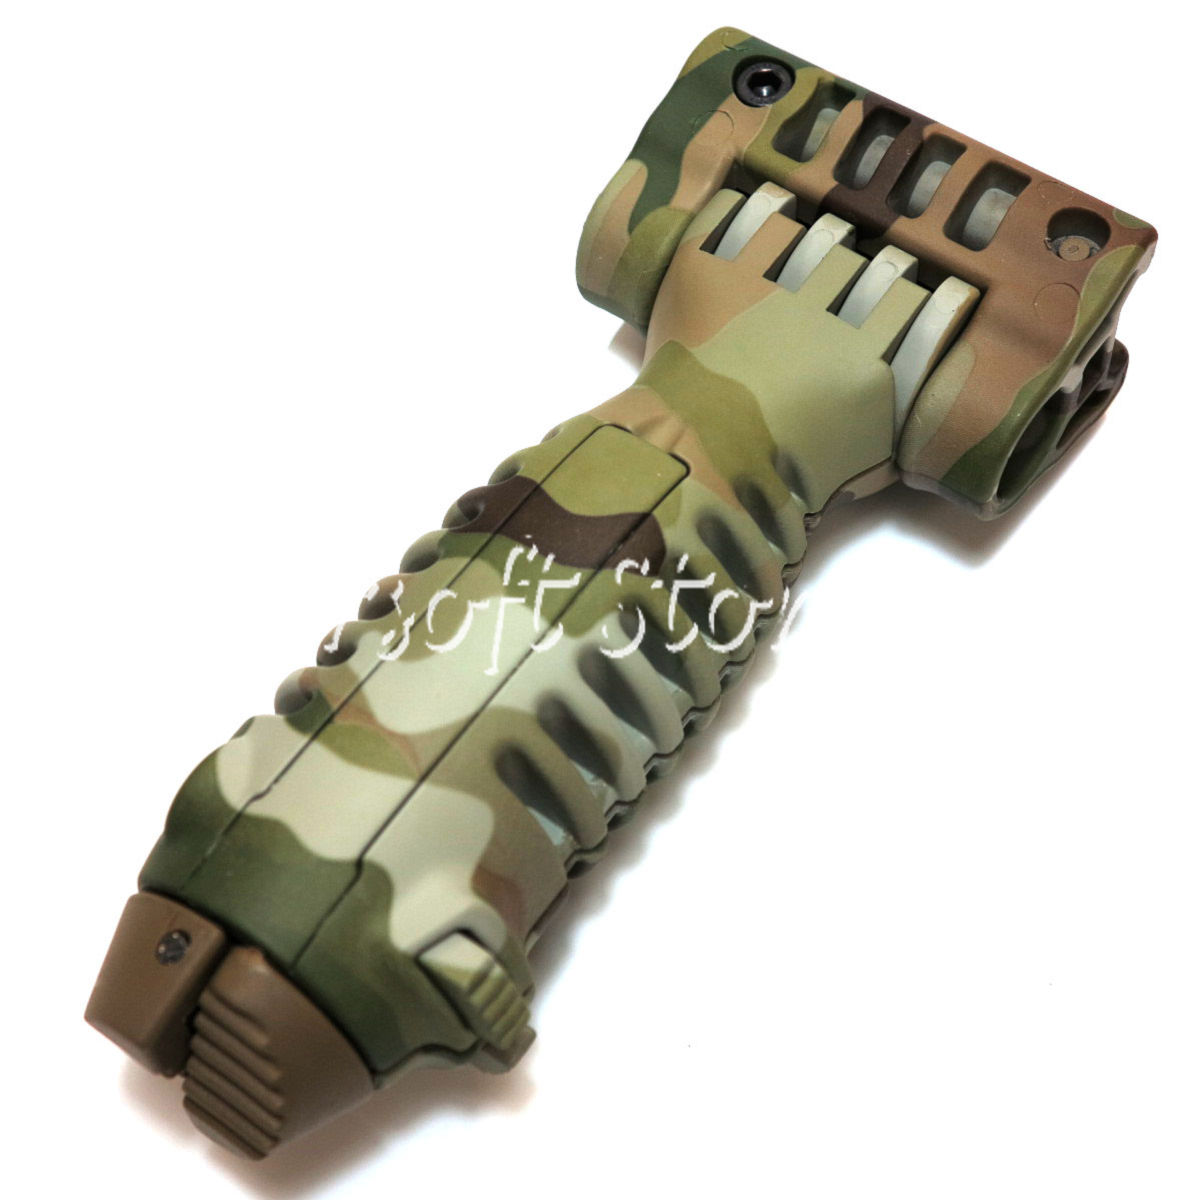 Airsoft Tactical Gear 20mm RIS Spring Total Bipod Foregrip Grip Multi Camo